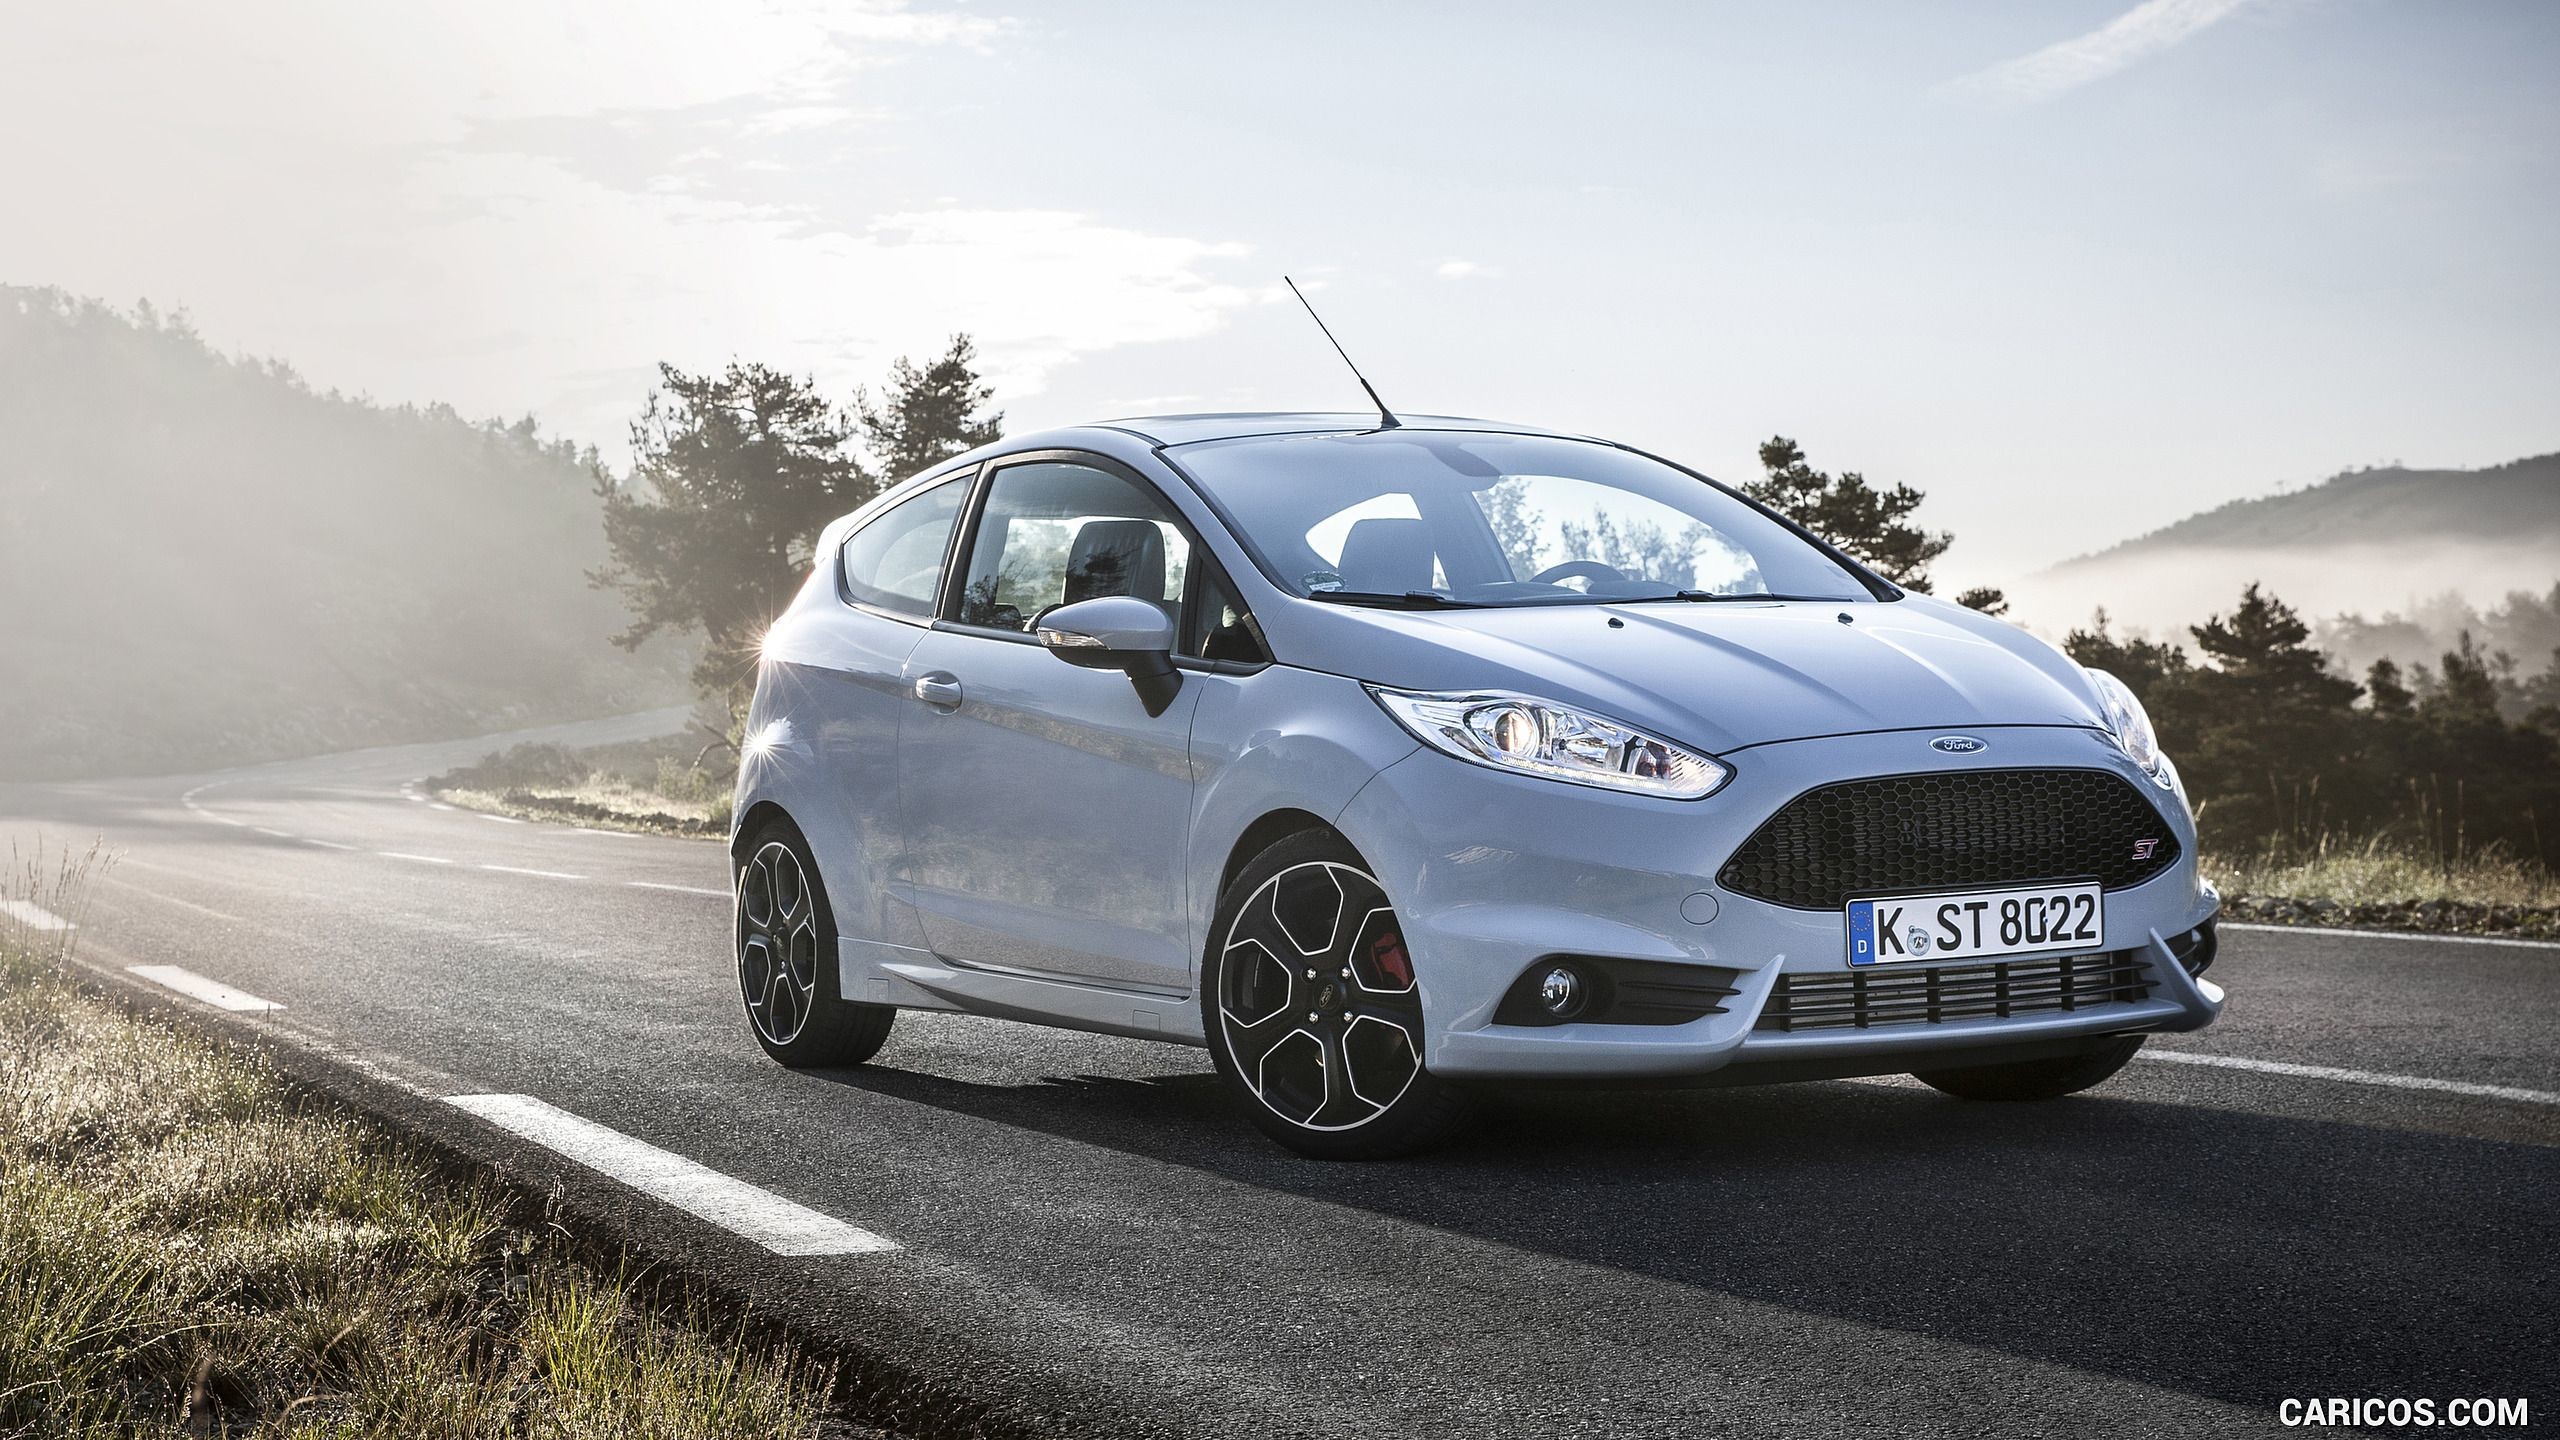 2560x1440 2018 Ford Fiesta St Wallpapers Hd Images Wsupercars 1920 X 1080 .